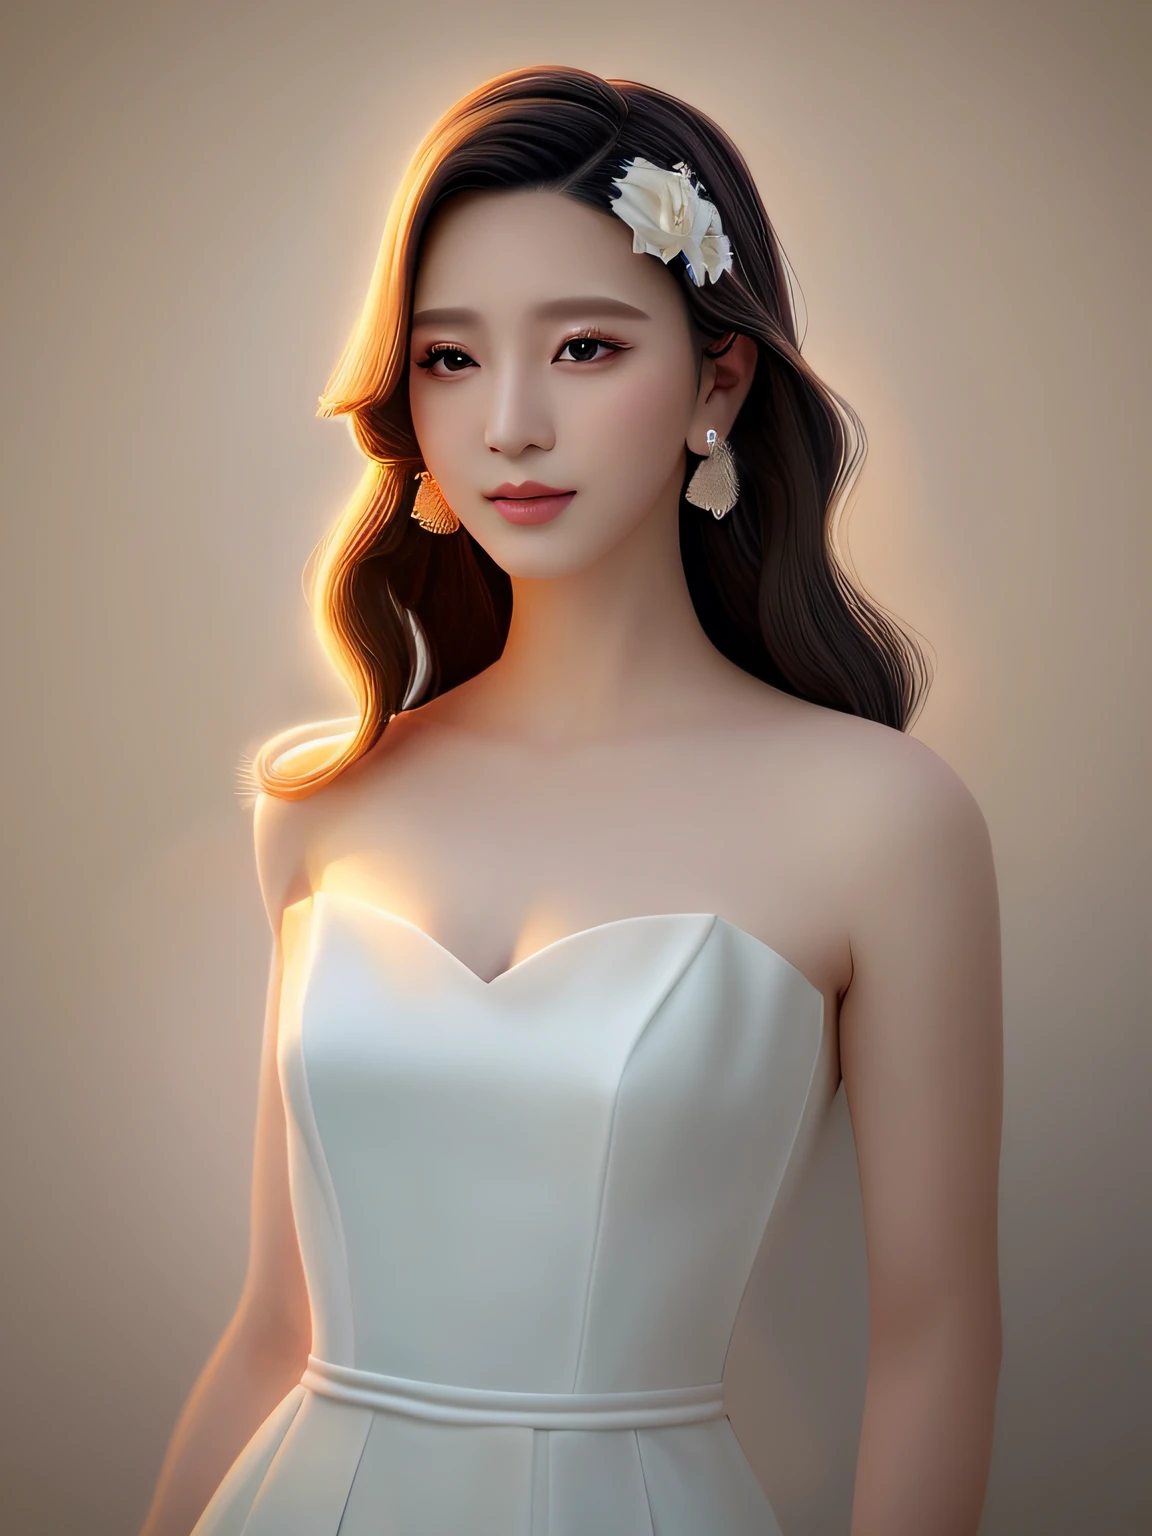 One in a white dress，Araved image of a woman with a flower on her head, digital art of an elegant, inspired by Sim Sa-jeong, in the art style of bowater, elegant digital painting, inspired by Russell Dongjun Lu, high quality 16k digital art, glossy digital painting, digital illustration portrait, Exquisite digital illustration